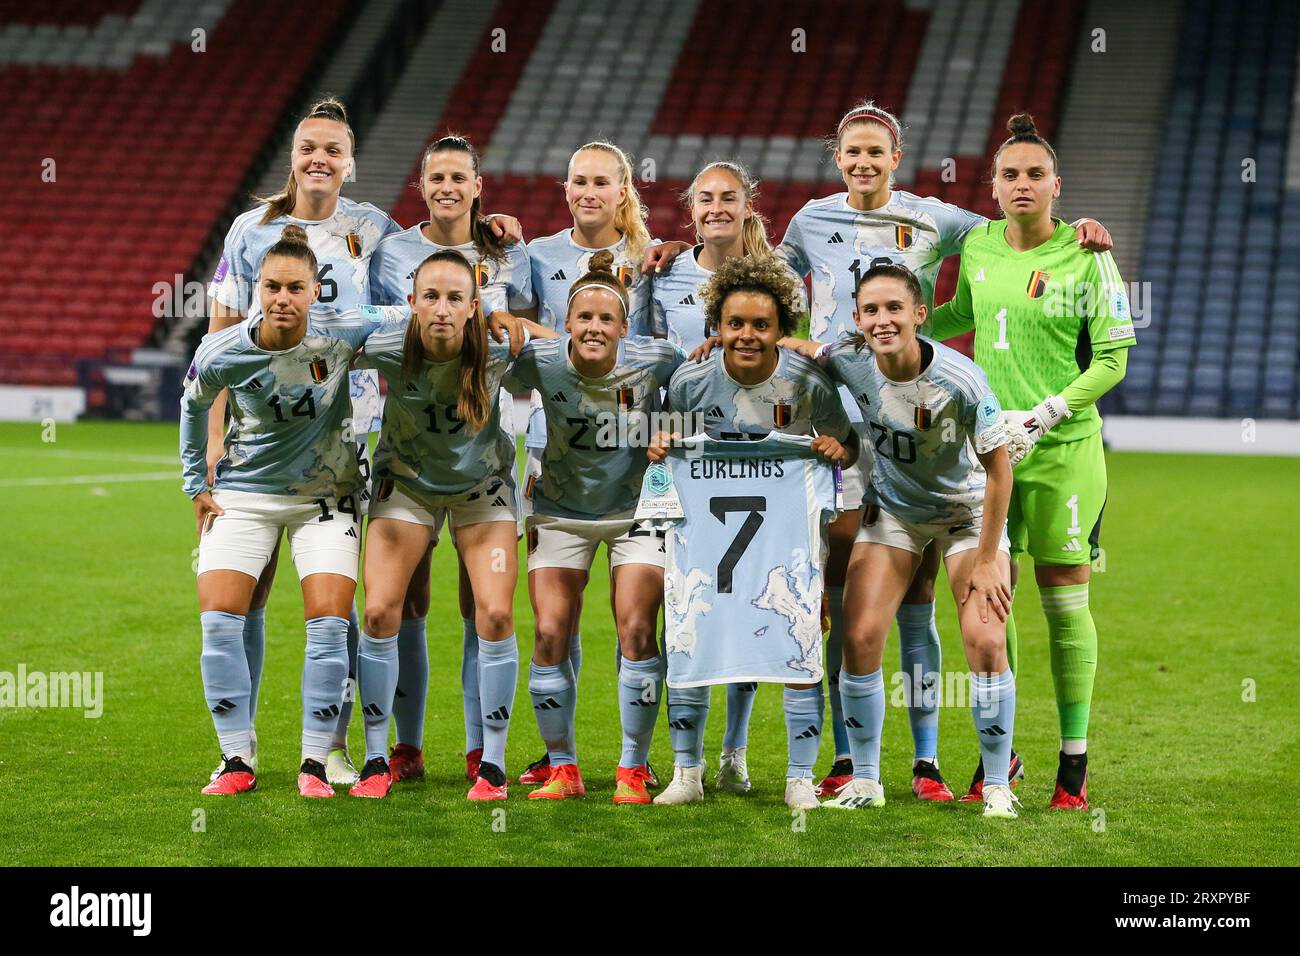 26 Sept 23, Glasgow, UK. In the first home fixture for Scotland in the new UEFA Women's Nations League, Scotland's play Belgium at Hampden Park, Glasgow, Scotland, UK. Credit: Findlay/Alamy Live News Stock Photo